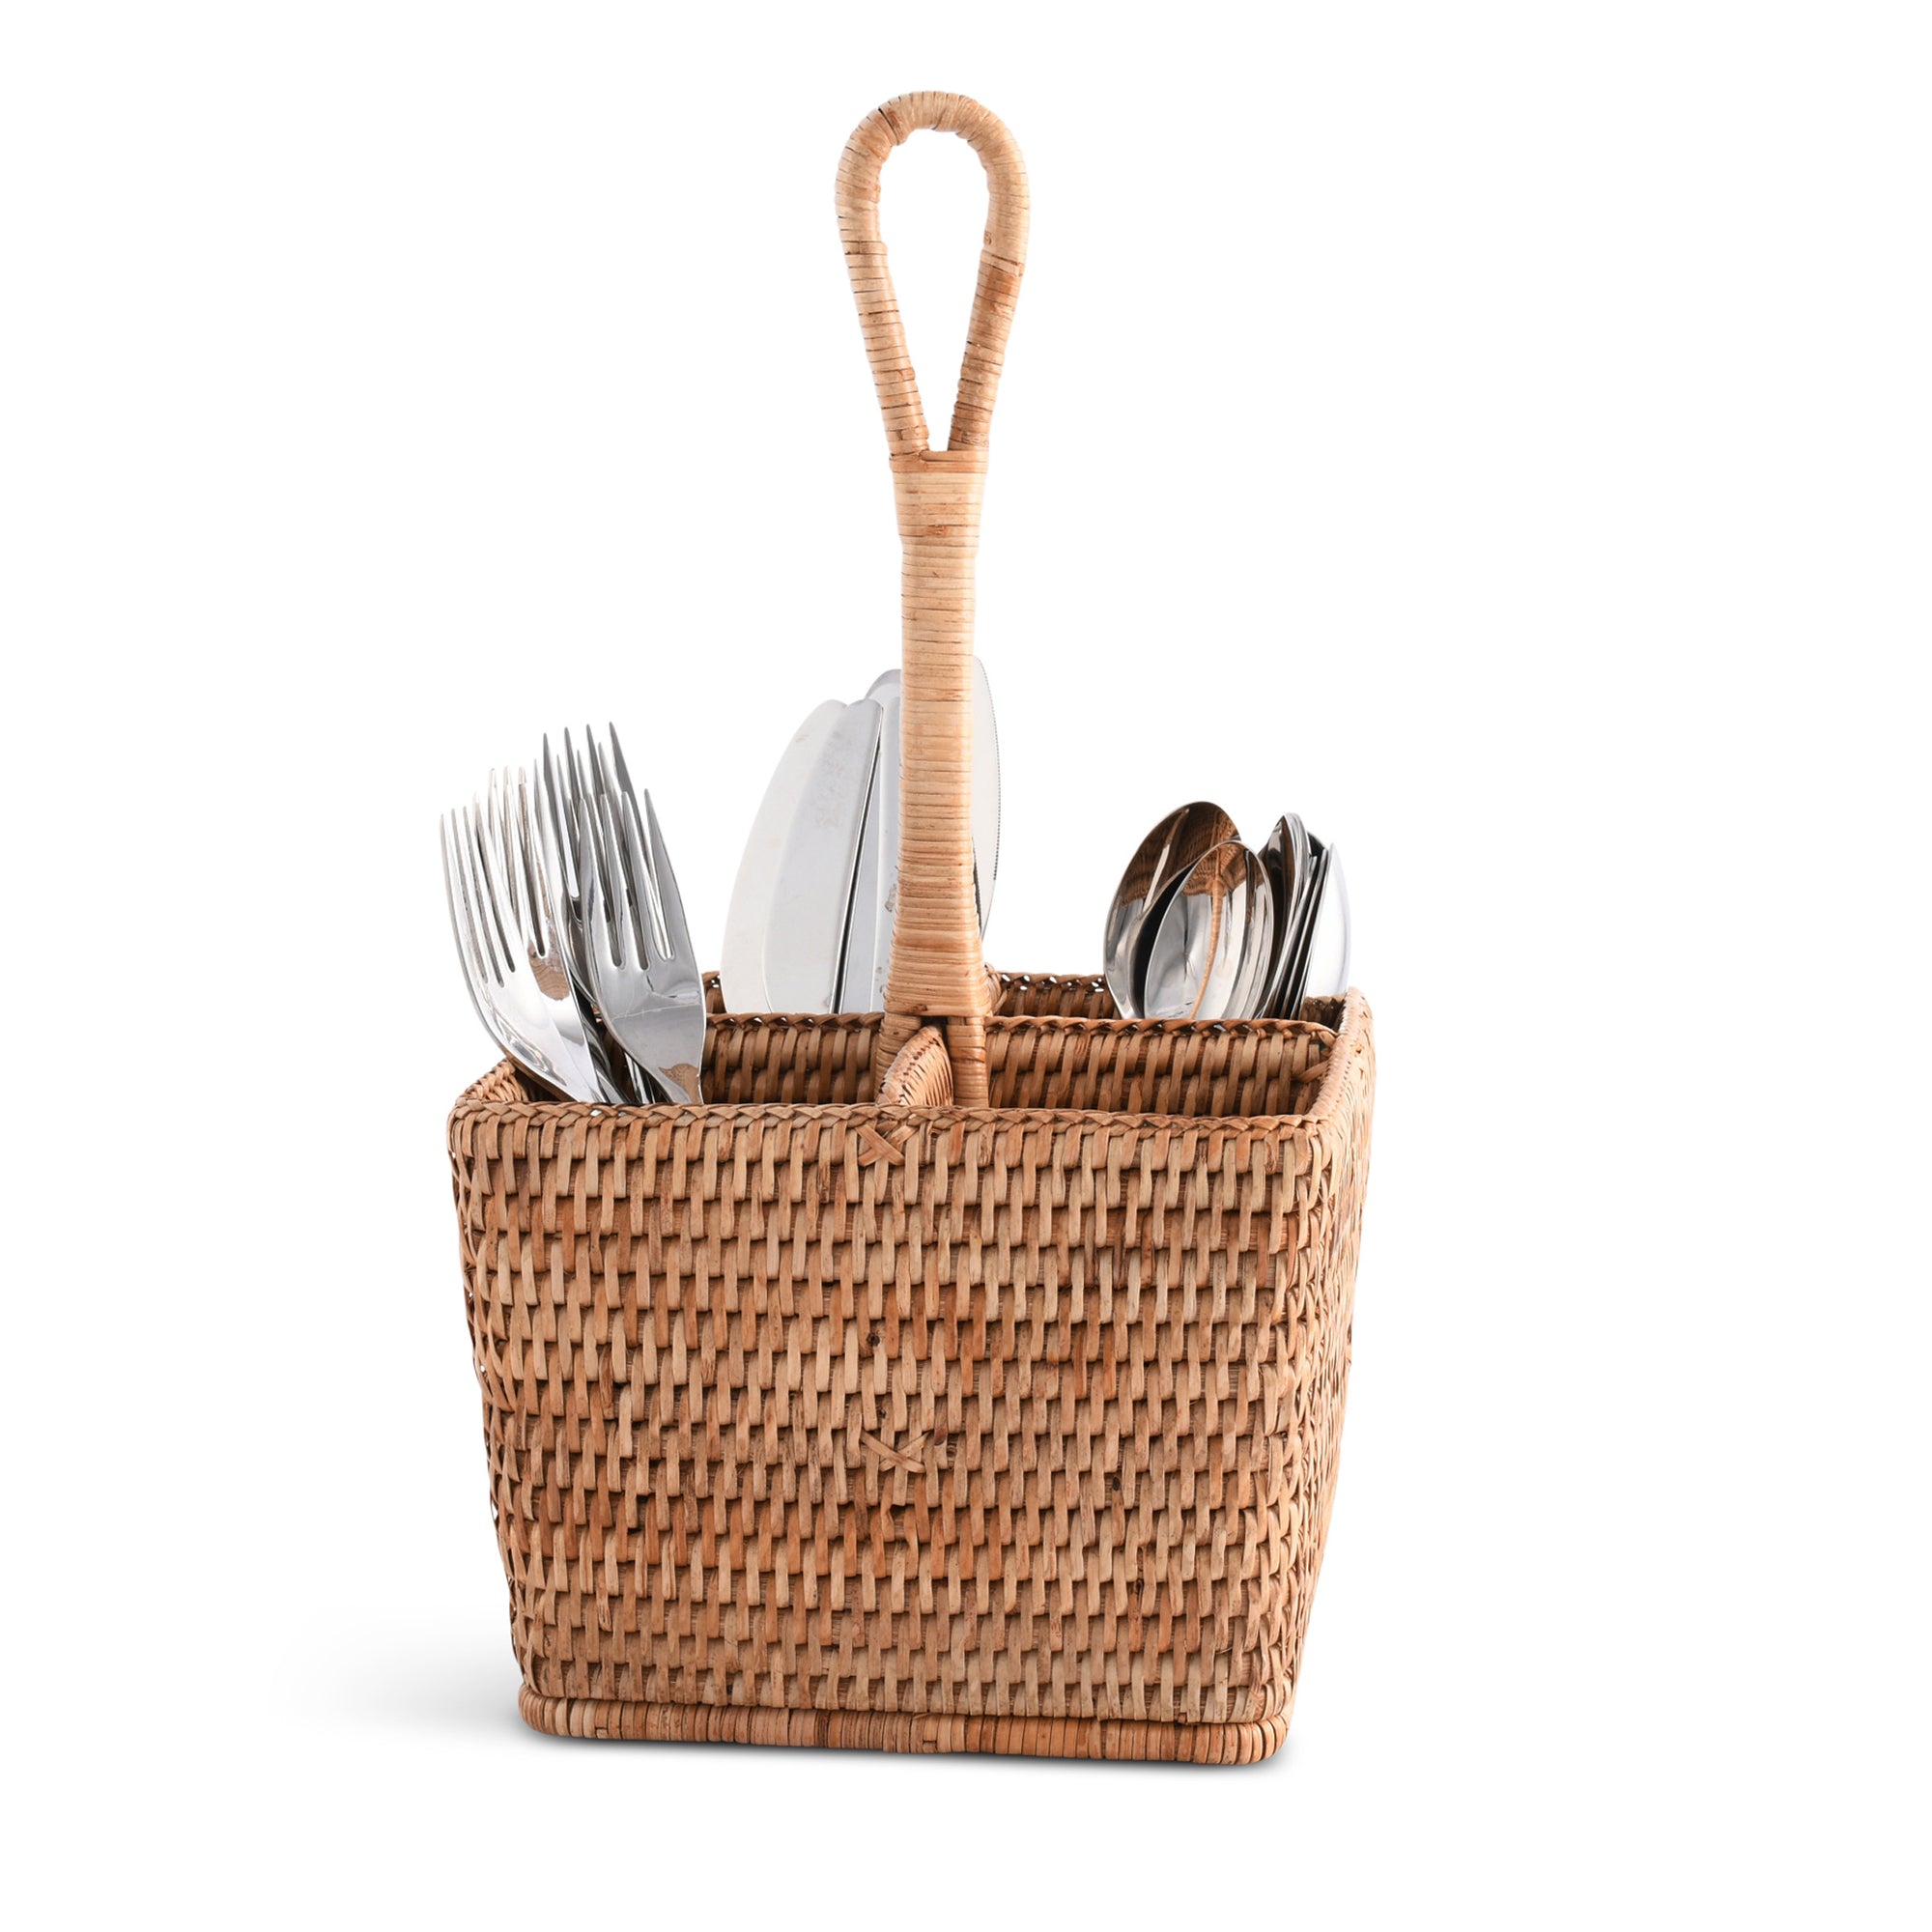 Vagabond House Hand Woven Rattan Wicker Flatware Caddy Product Image